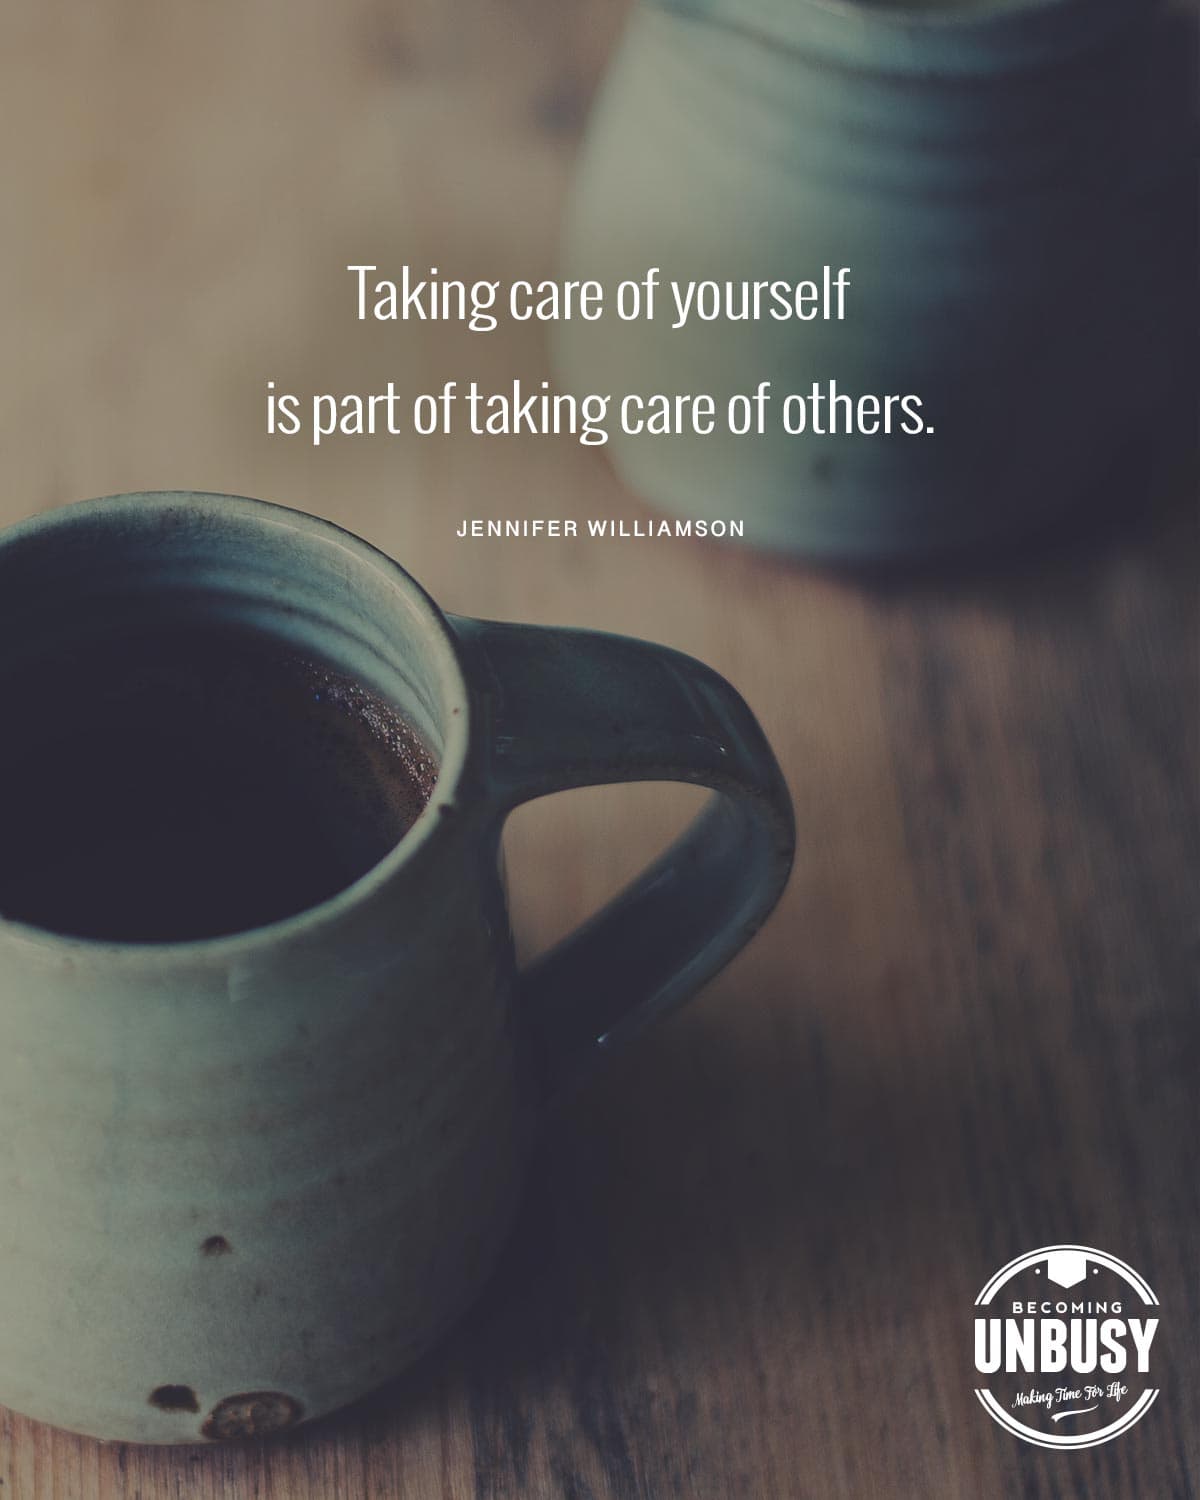 The following winter self-care quote over a photo of a cup of tea, "Taking care of yourself is part of taking care of others."